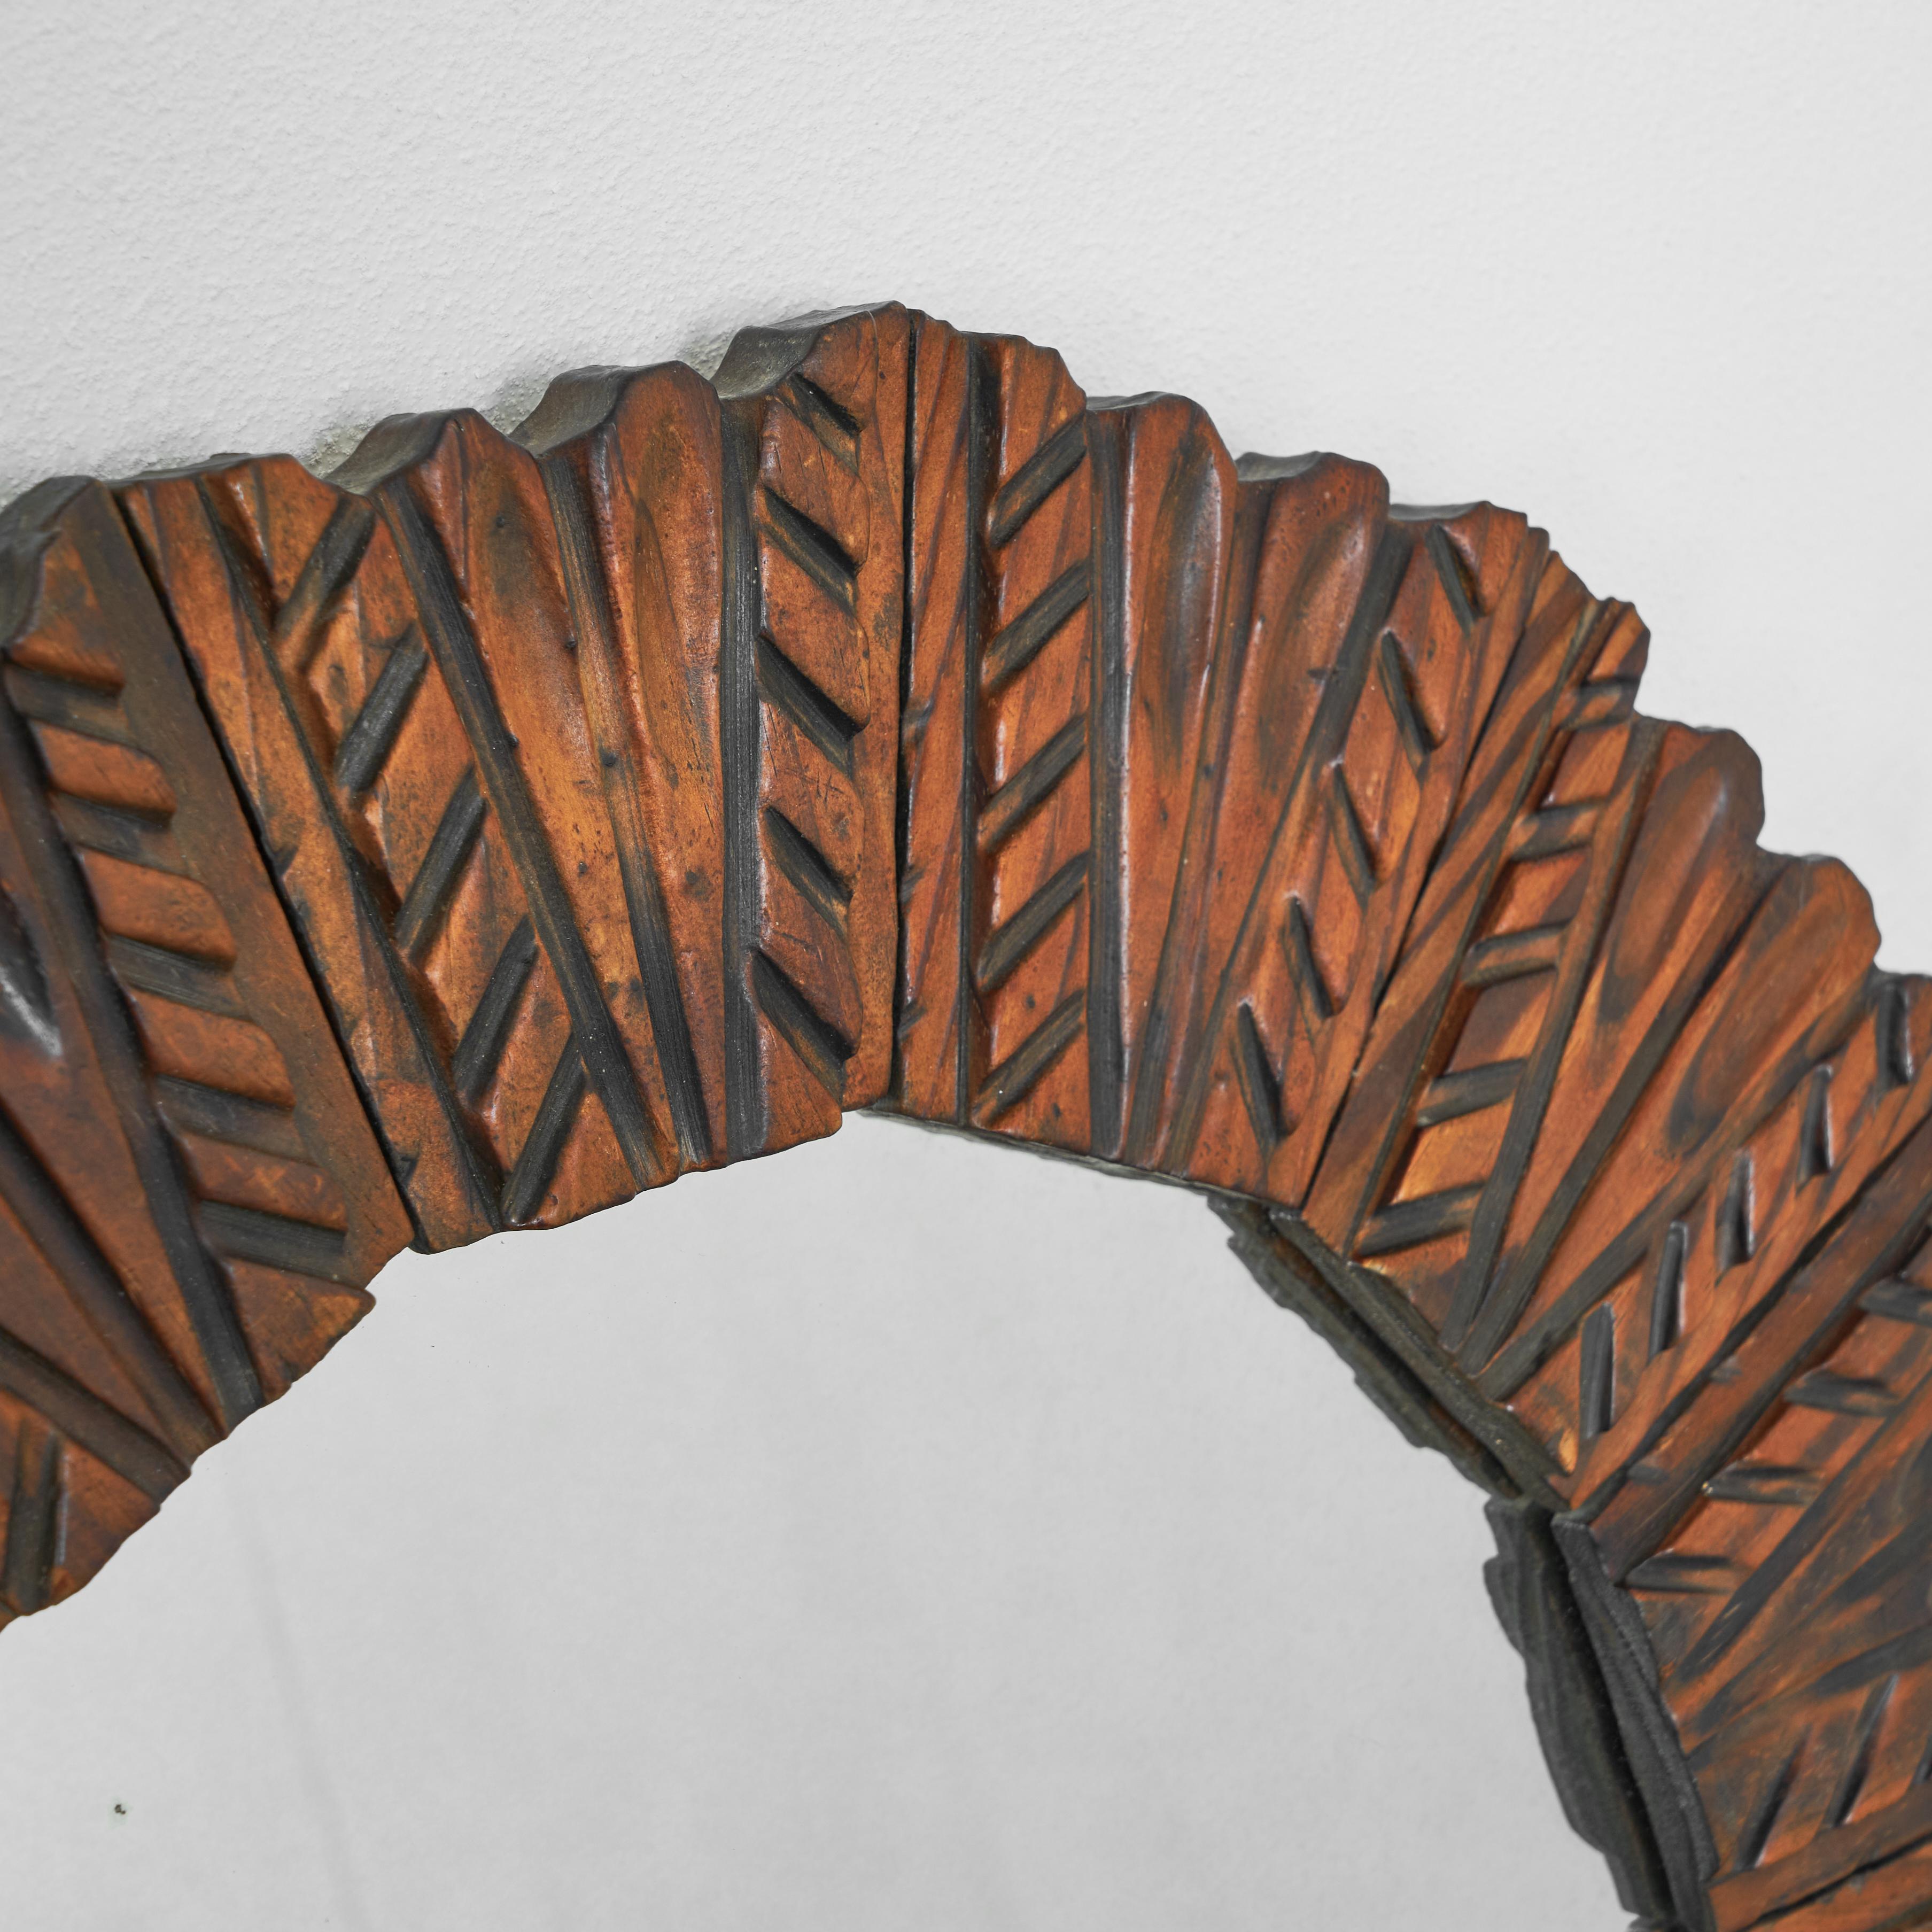 Hand-Crafted Midcentury Mirror in Carved Wood 1960s For Sale